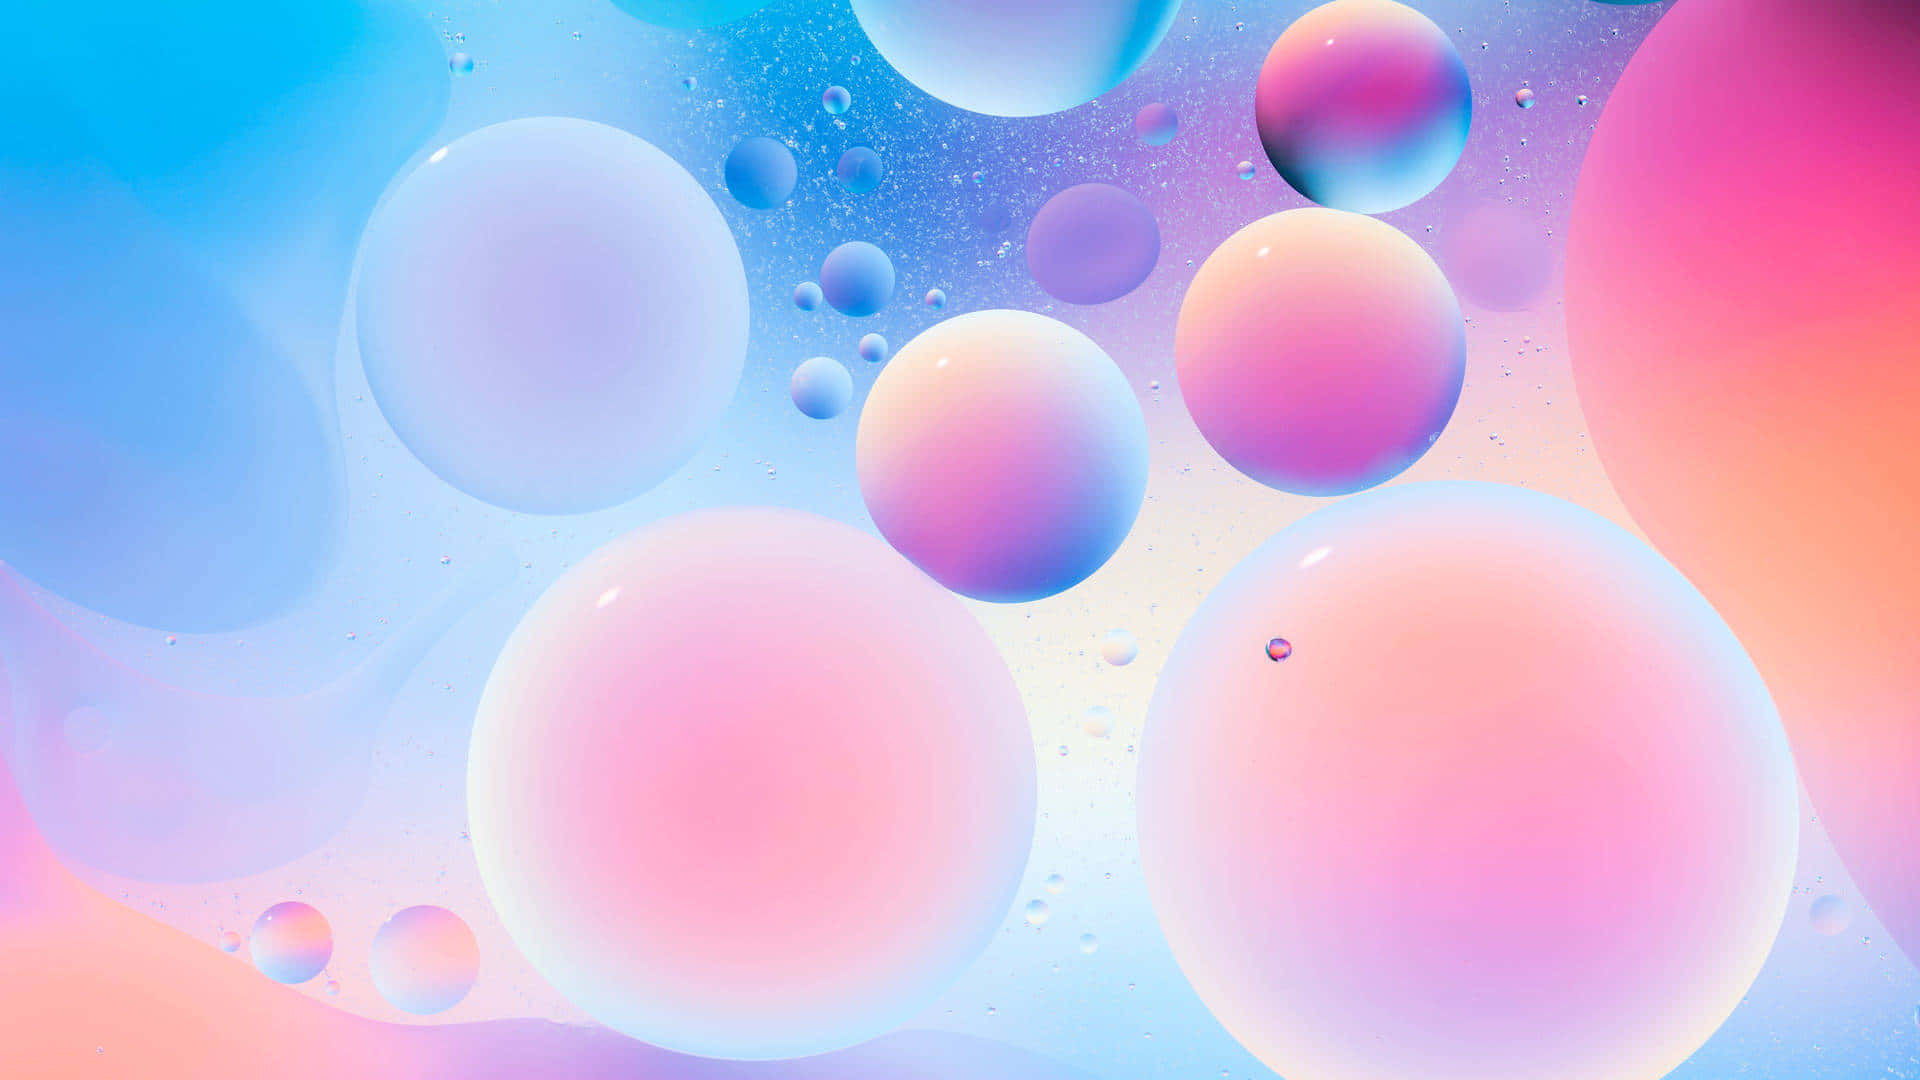 Abstract Pastel Oiland Water Bubbles Wallpaper